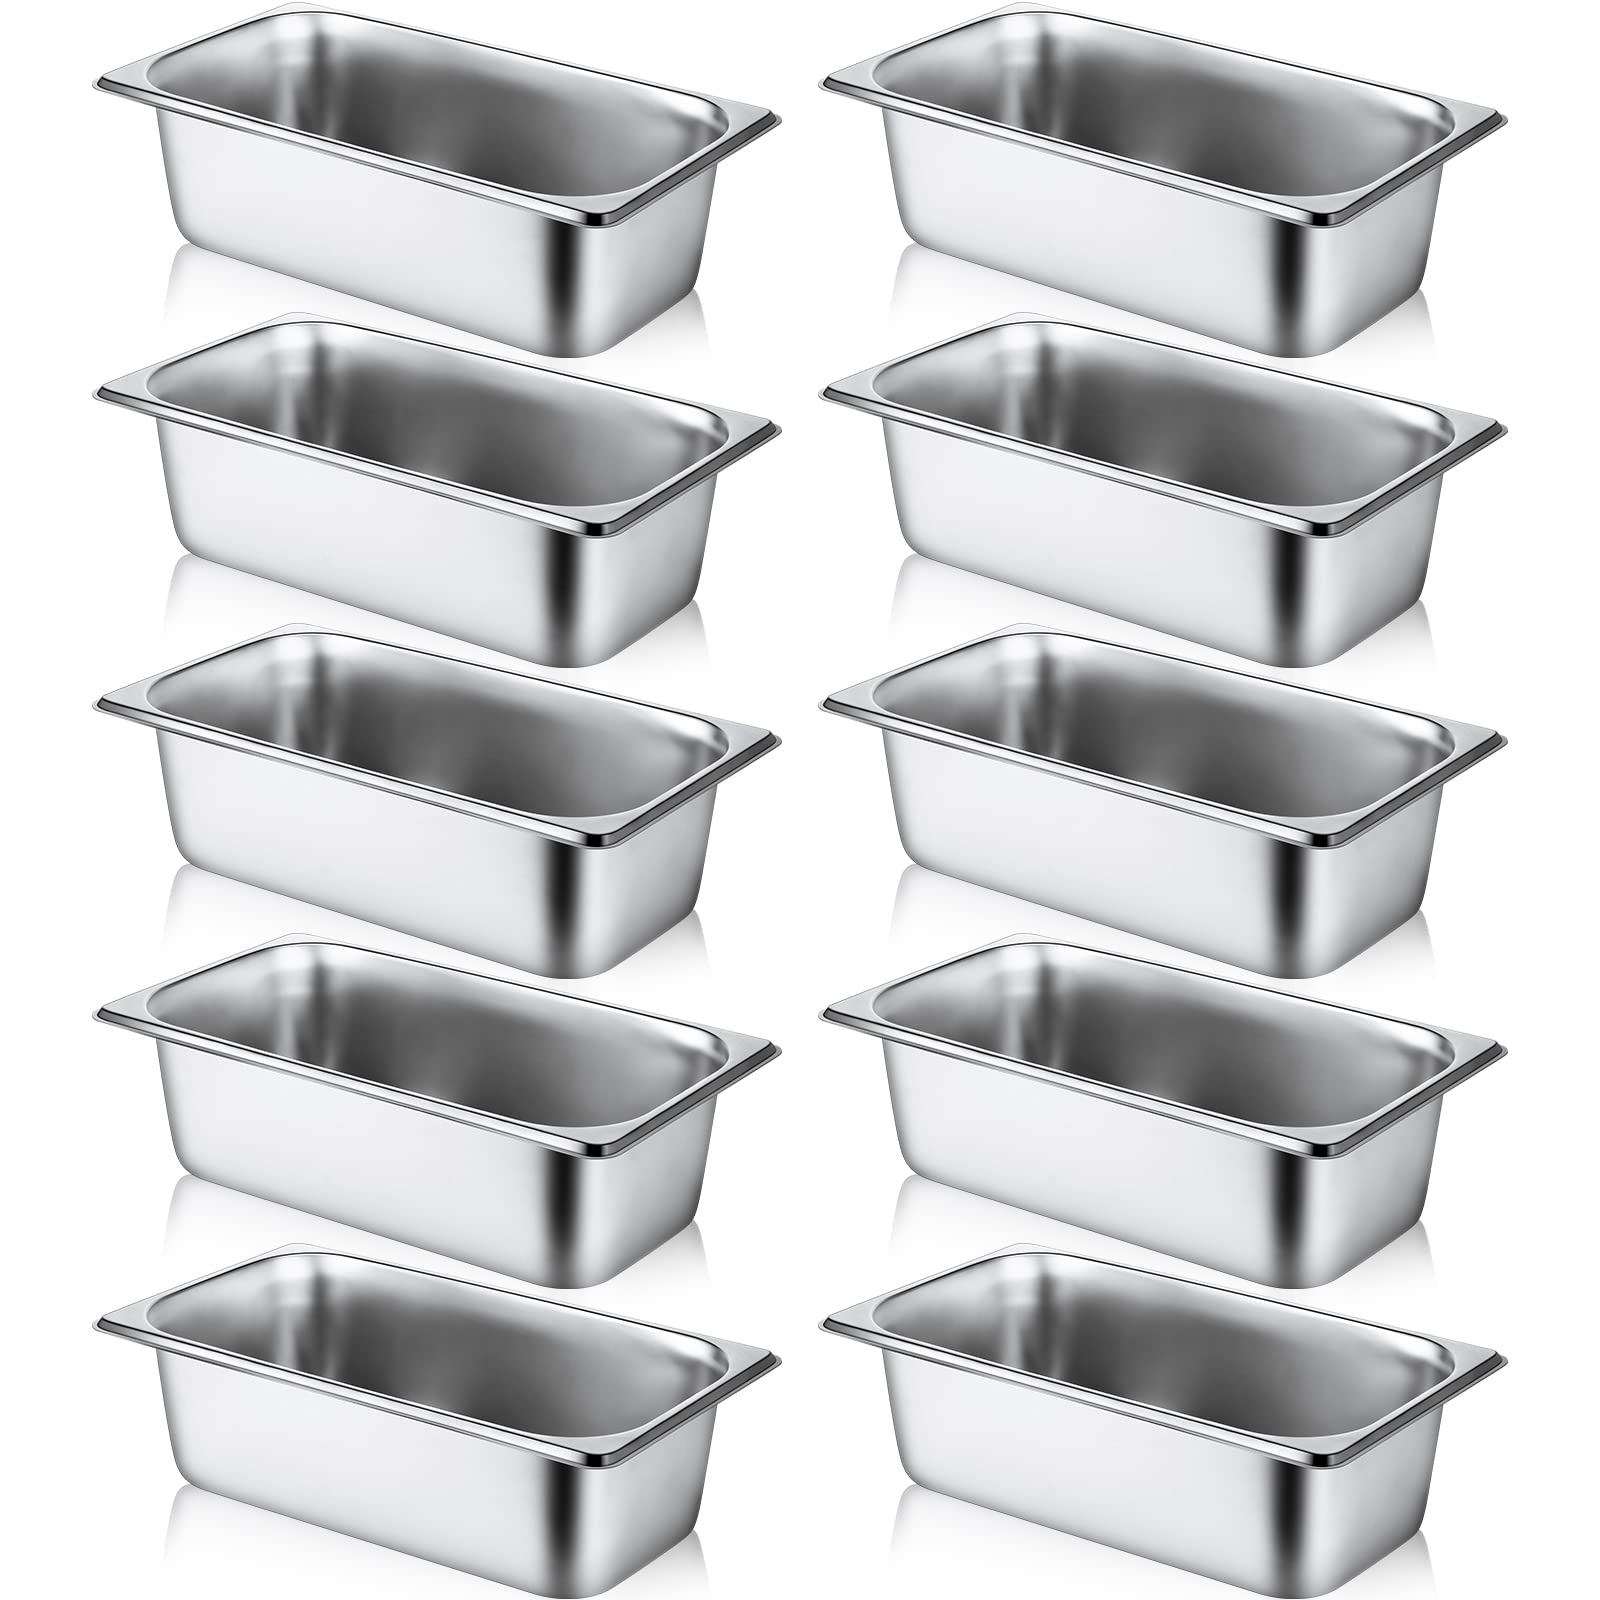 10 Pack Hotel Pans Stainless Steel Steam Table Water Pan